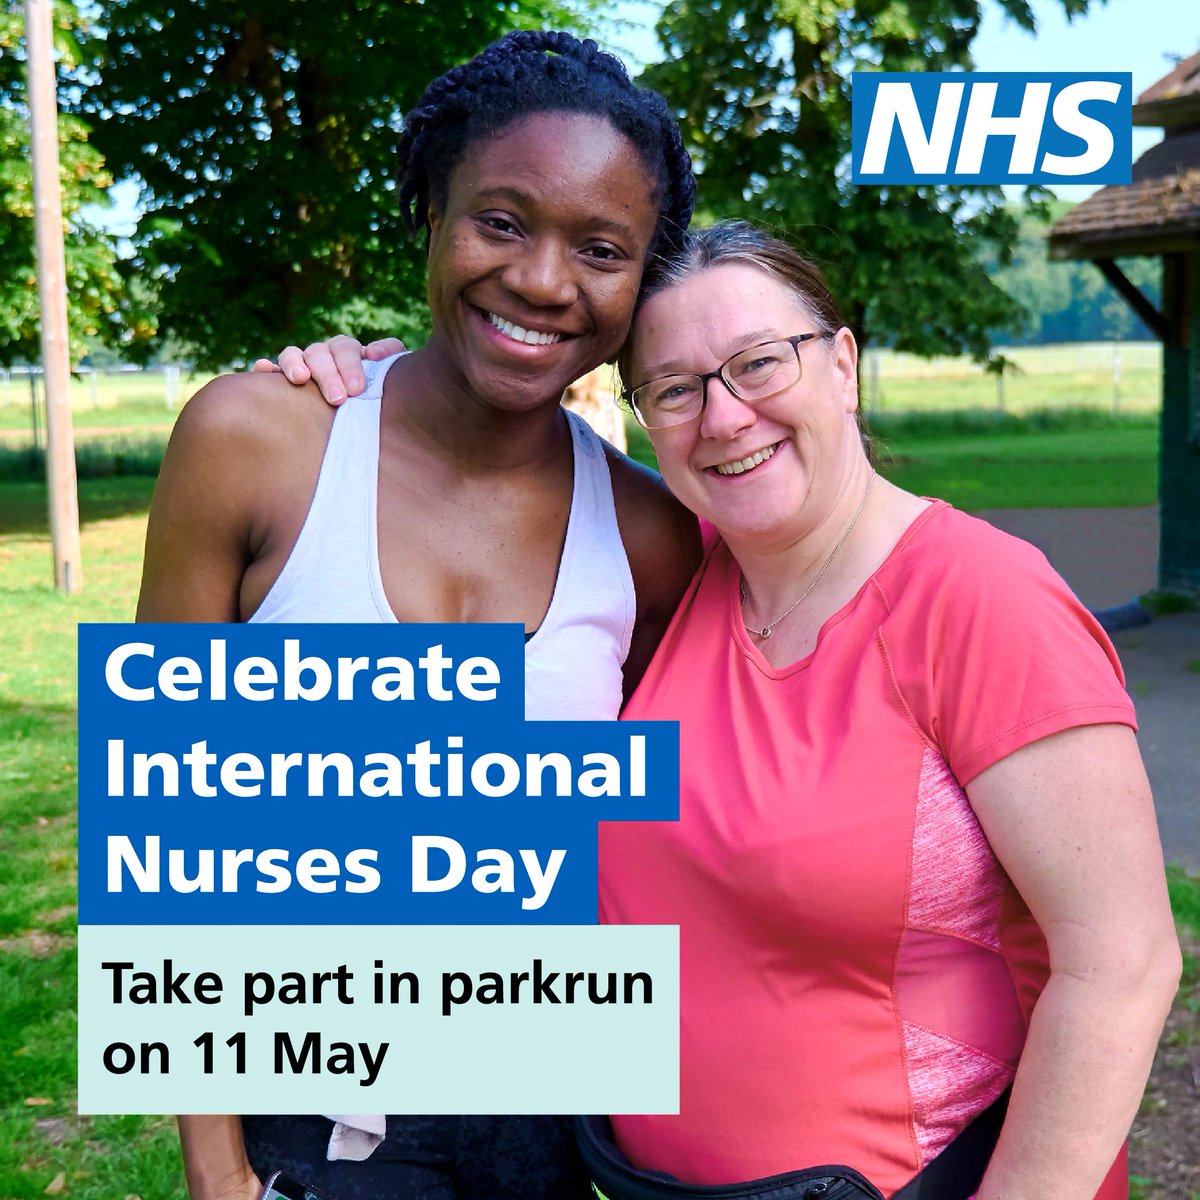 Join us as we celebrate International Nurses Day #IND2024 with @parkrunUK. Register for your local parkrun and take part on 11 May. ow.ly/vKIl50ReNX7